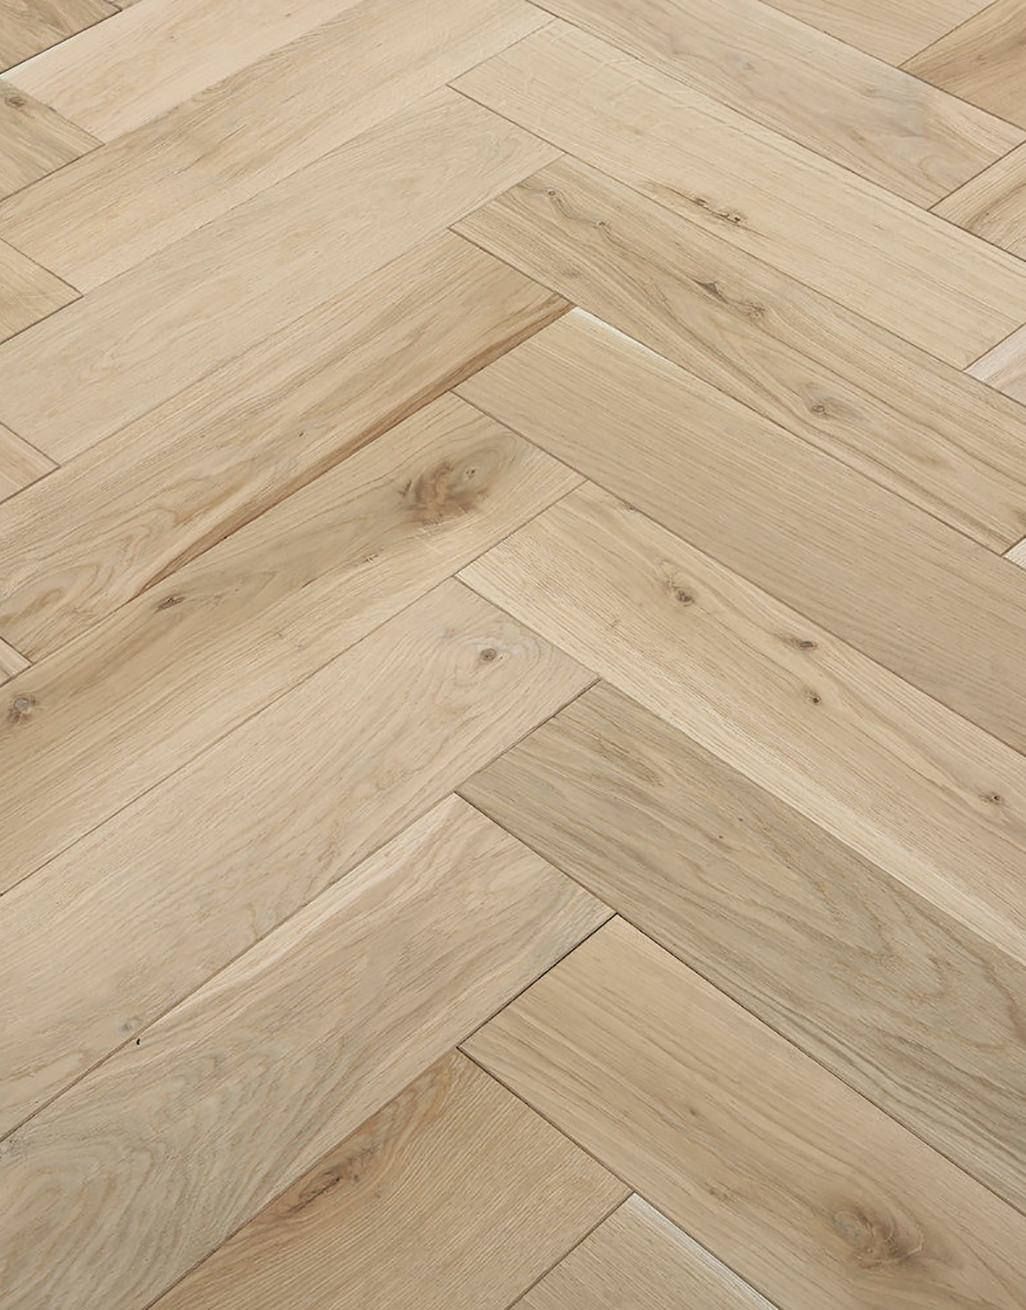 Unfinished Luxury Parquet Oak Solid, Is Parquet Flooring Coming Back